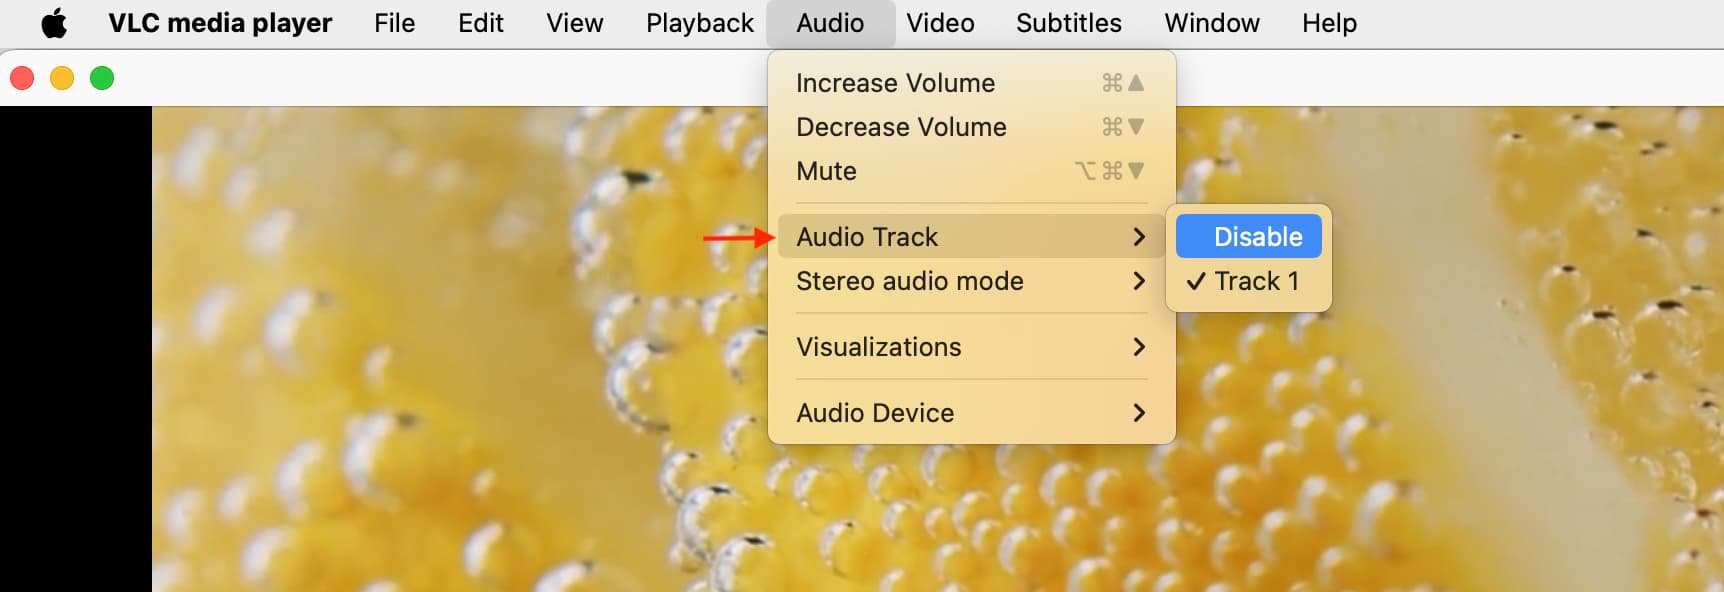 Audio Track option in VLC on Mac